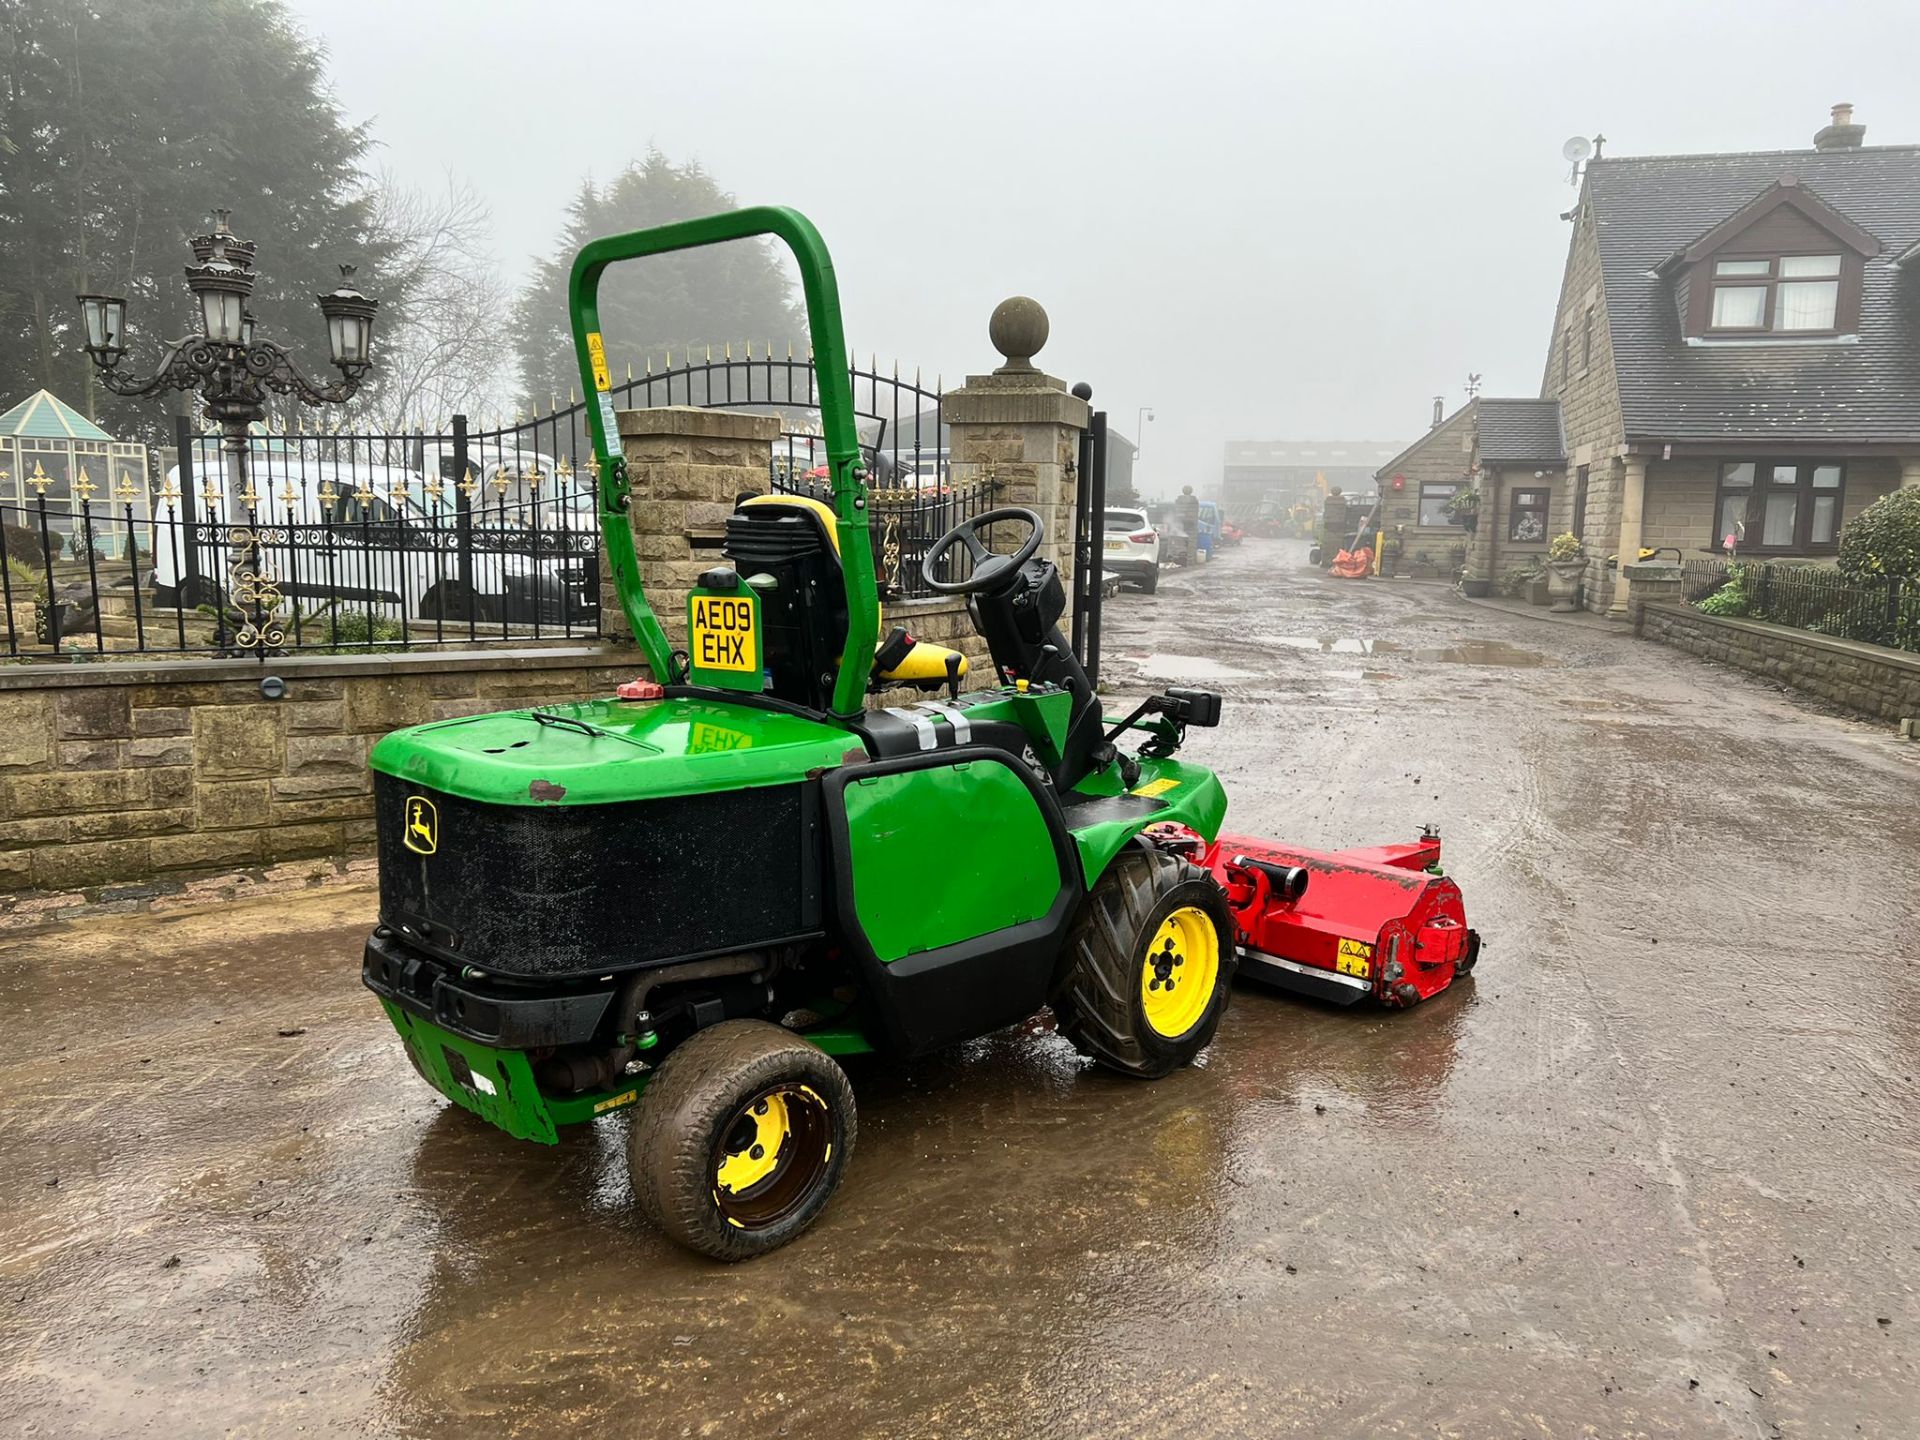 2009 JOHN DEERE 1445 4WD RIDE ON MOWER, RUNS DRIVES AND CUTS, SHOWING A LOW 3794 HOURS *PLUS VAT* - Image 5 of 13